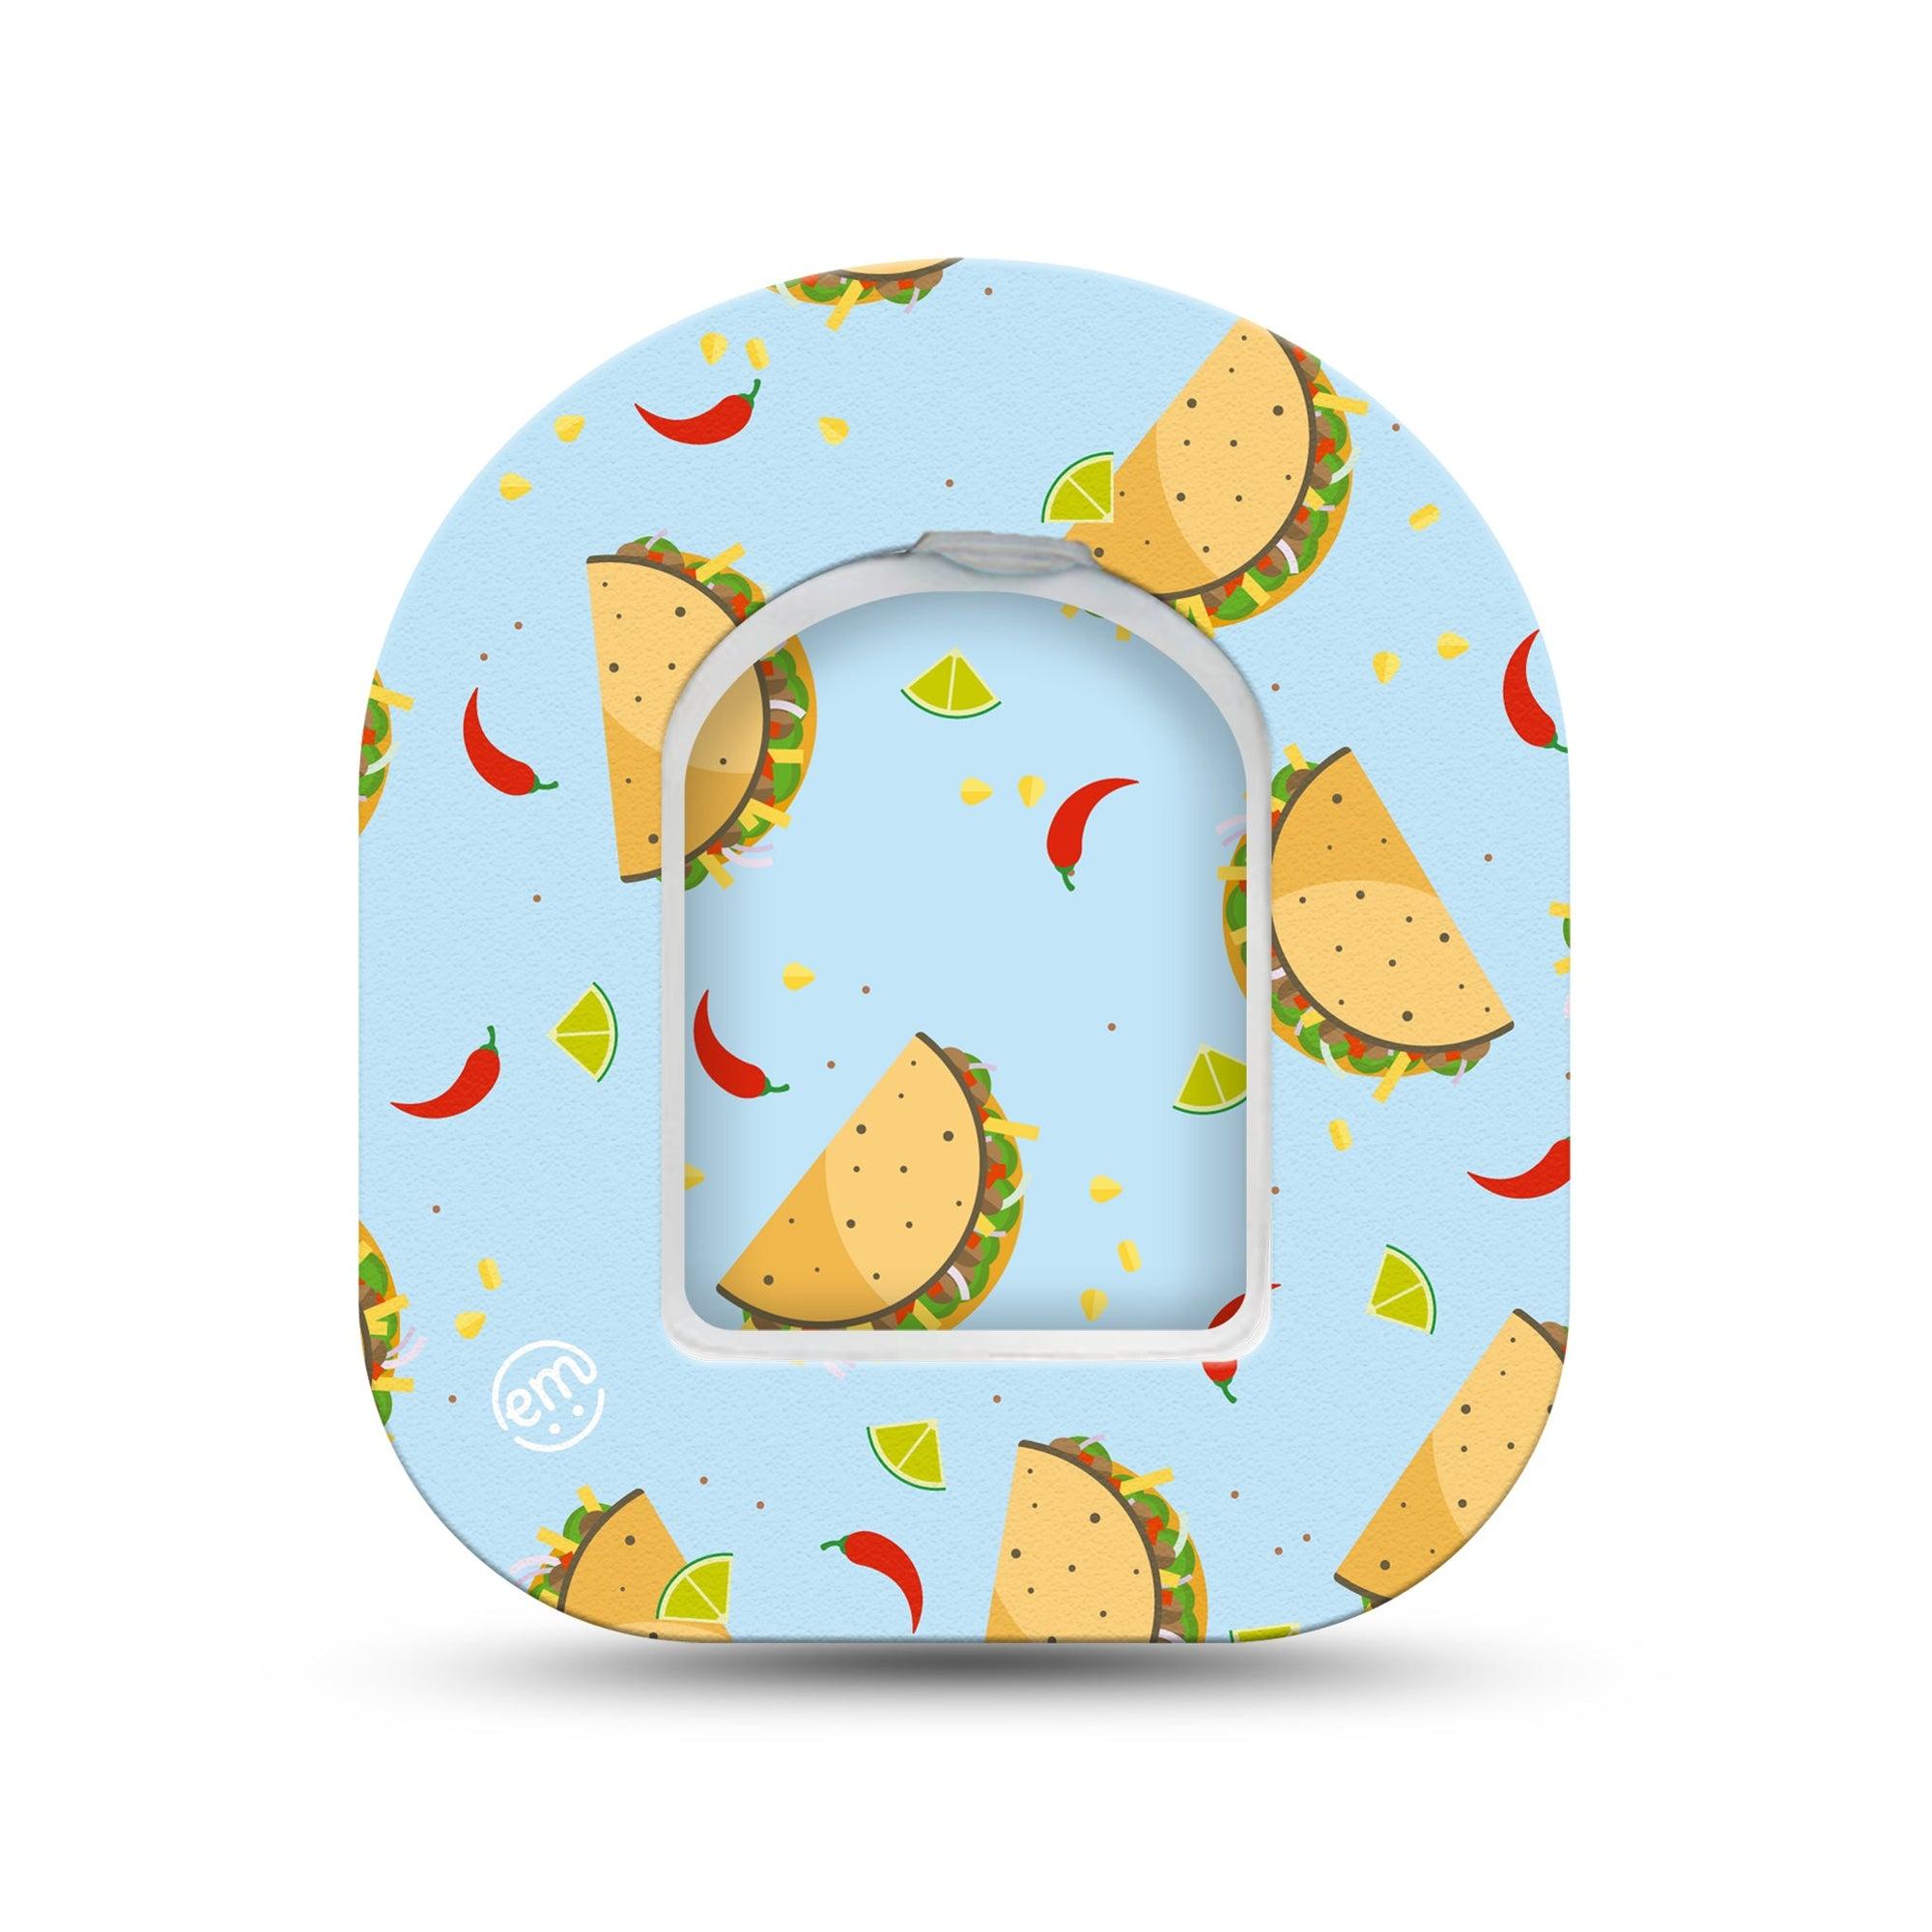 ExpressionMed Spicy Tacos Omnipod Surface Center Sticker and Mini Tape Taco and Hot Jalapenos Print Vinyl Sticker and Tape Design Pump Design